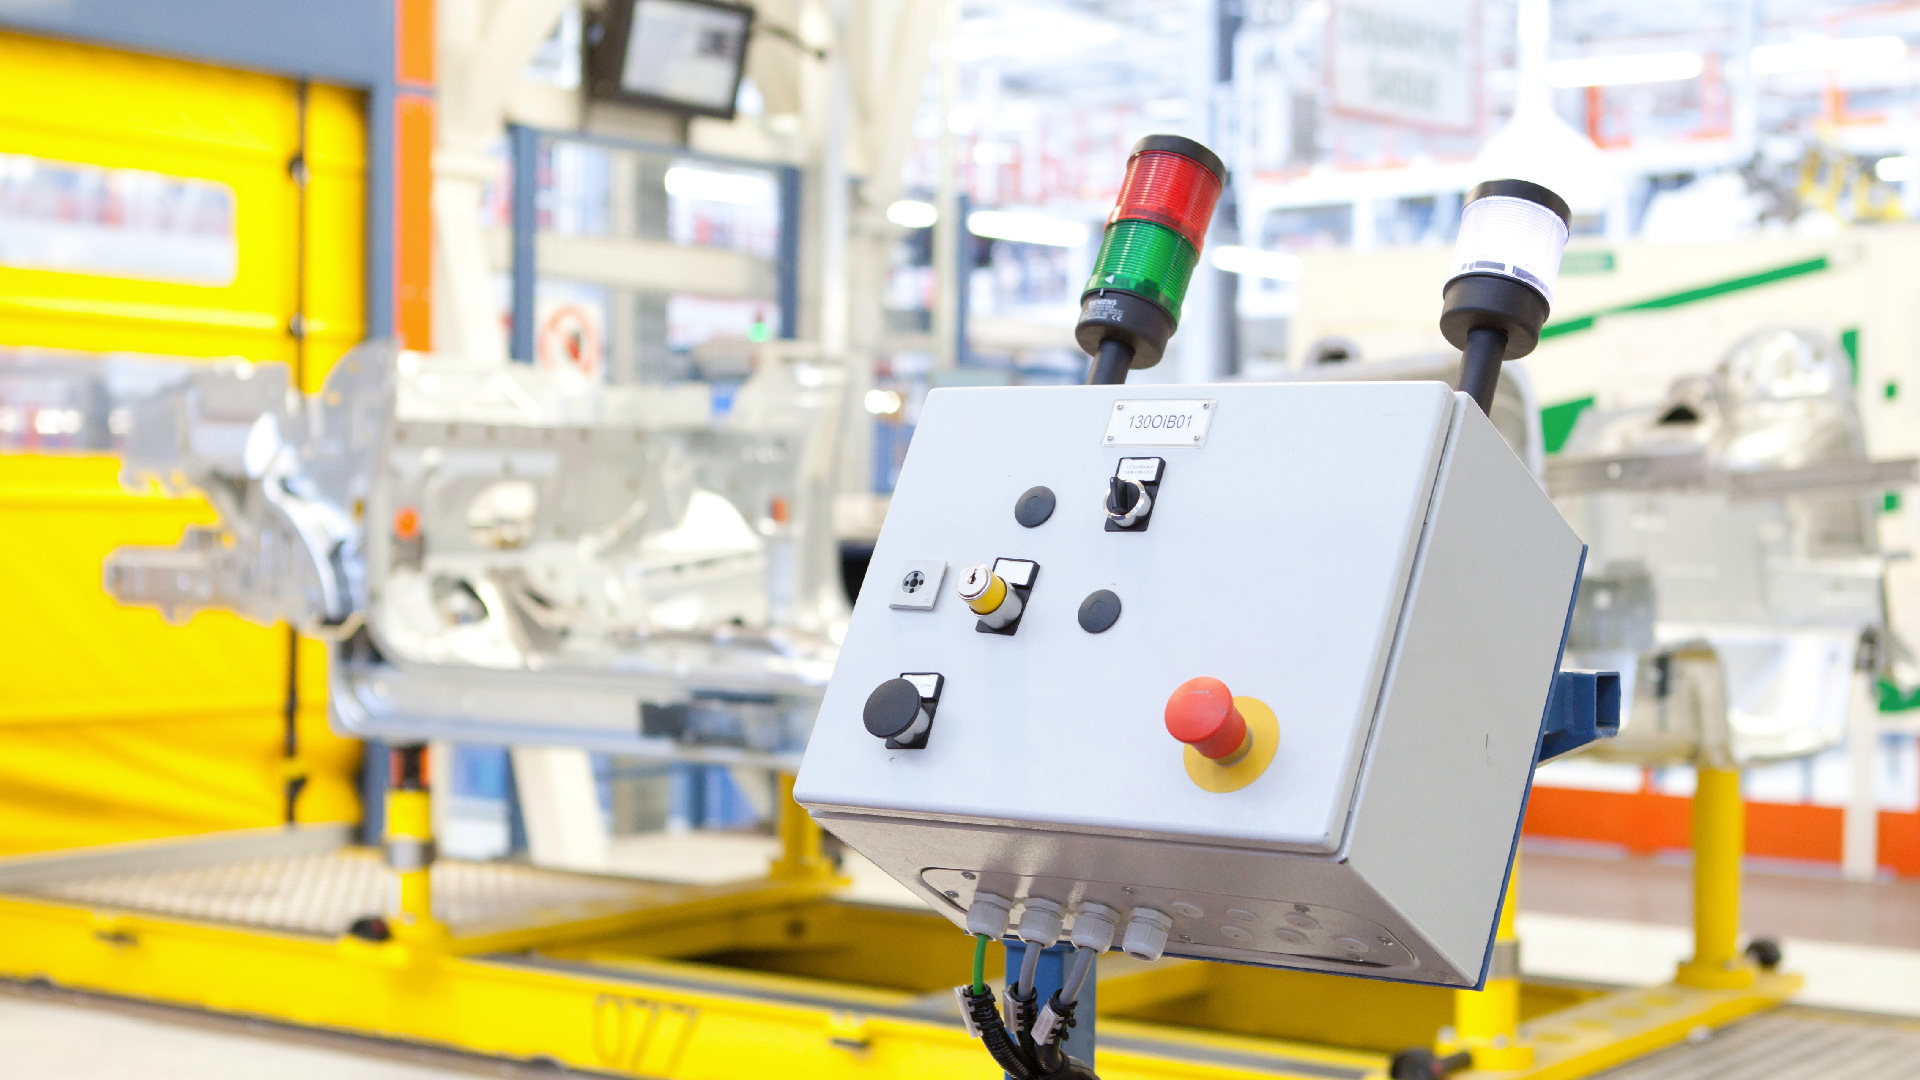 10 Machine Safety Rules You Should Follow - Rowse